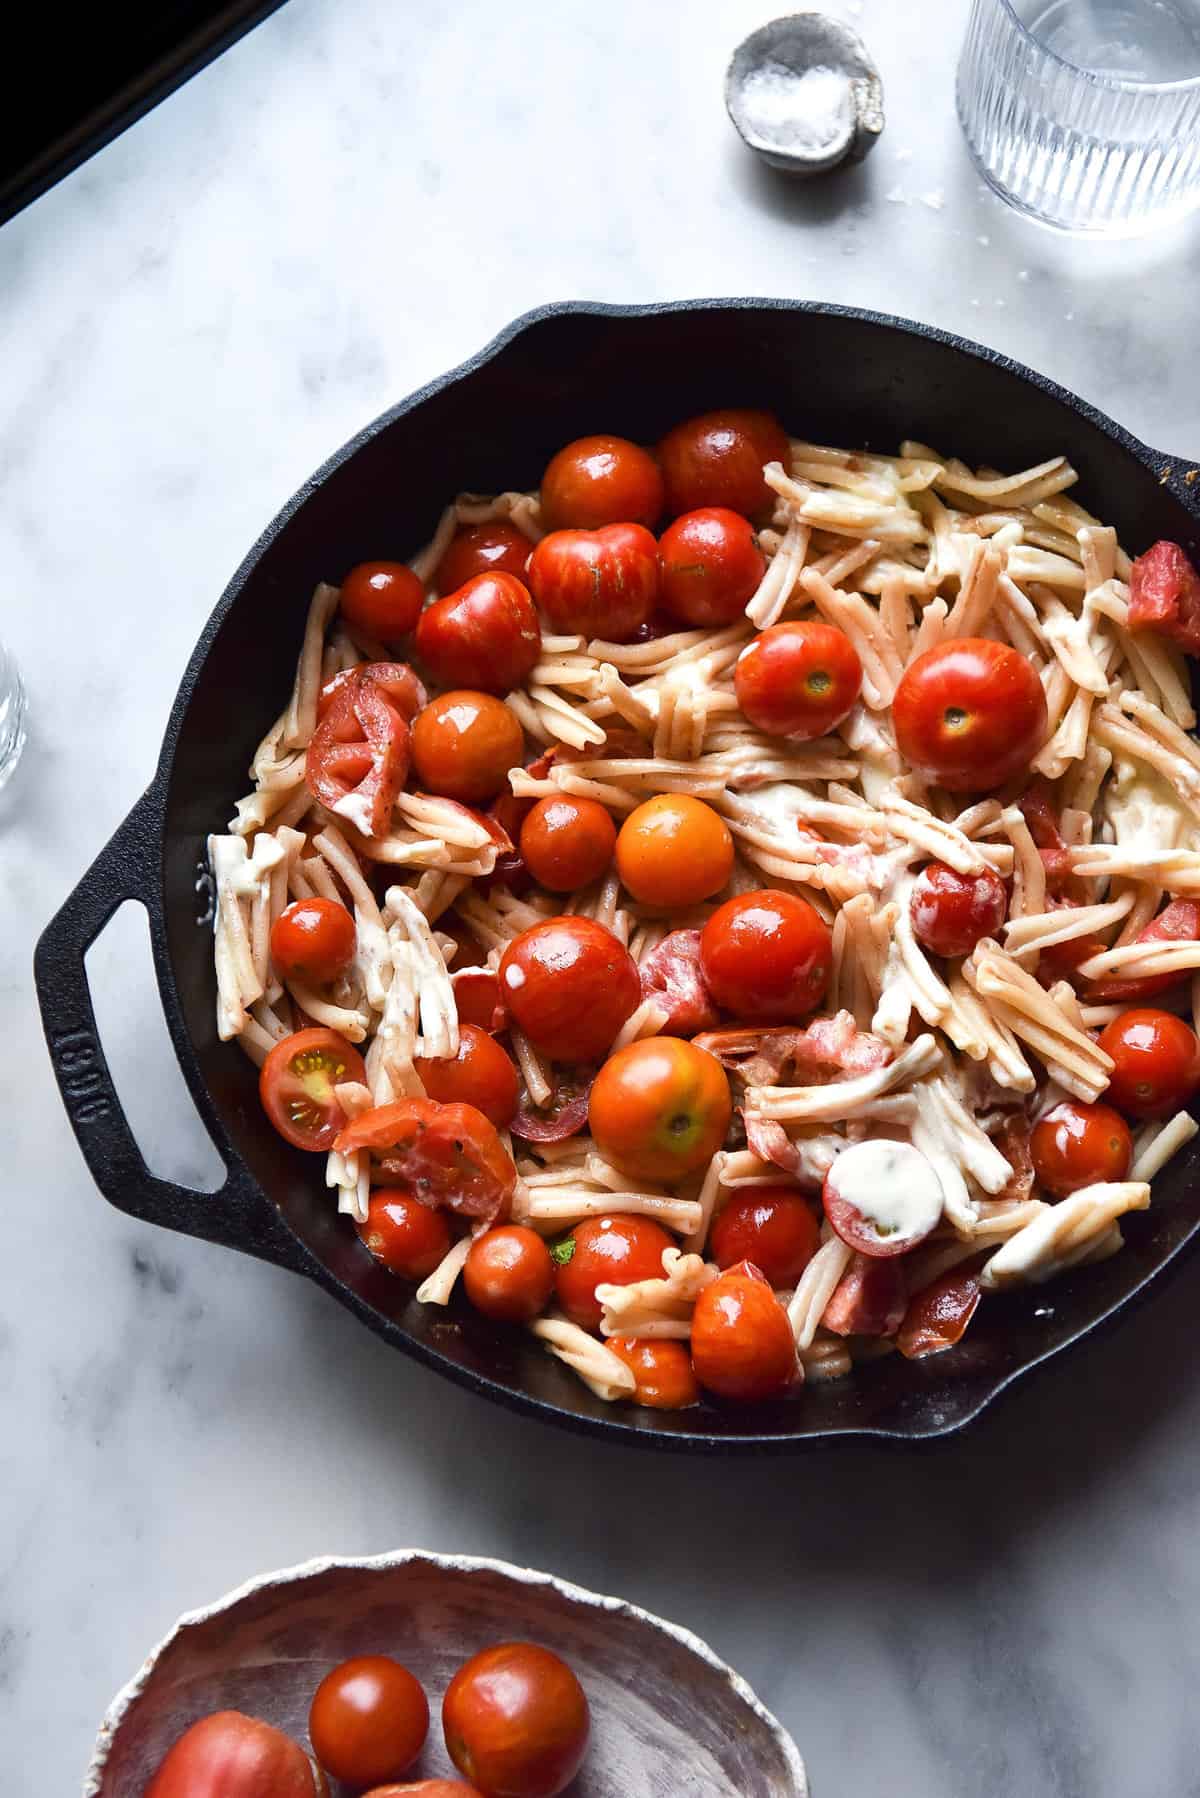 Summer tomato, lemon and mascarpone pasta in a skillet on a white marble table. The skillet is surrounded by water glasses and an extra bowl of pasta